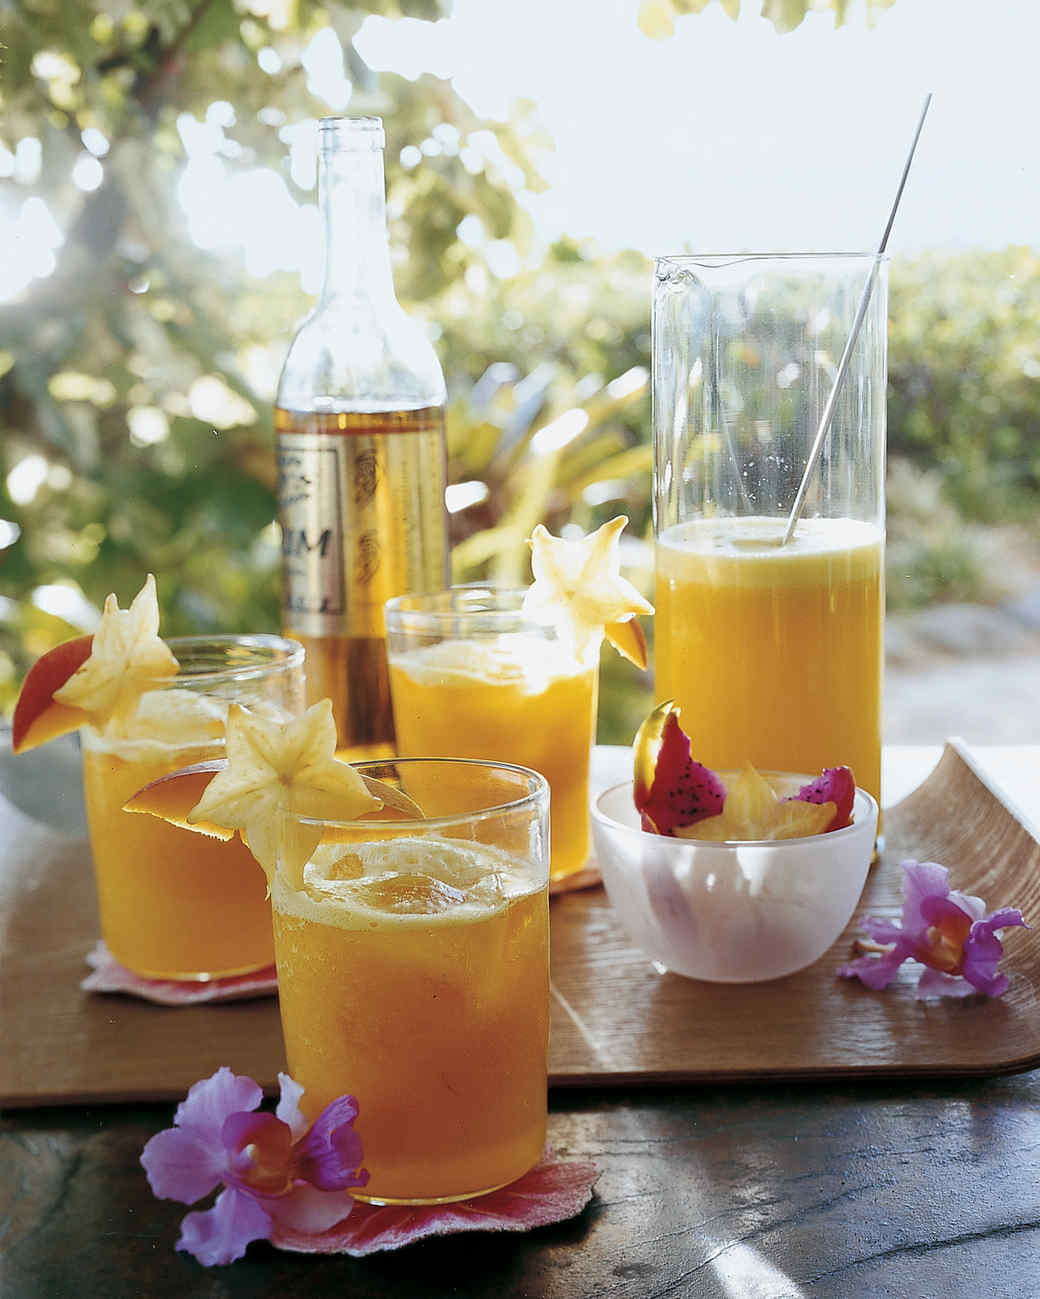 Rum Drinks With Pineapple Juice
 Pineapple and Mango Rum Cocktails Recipe